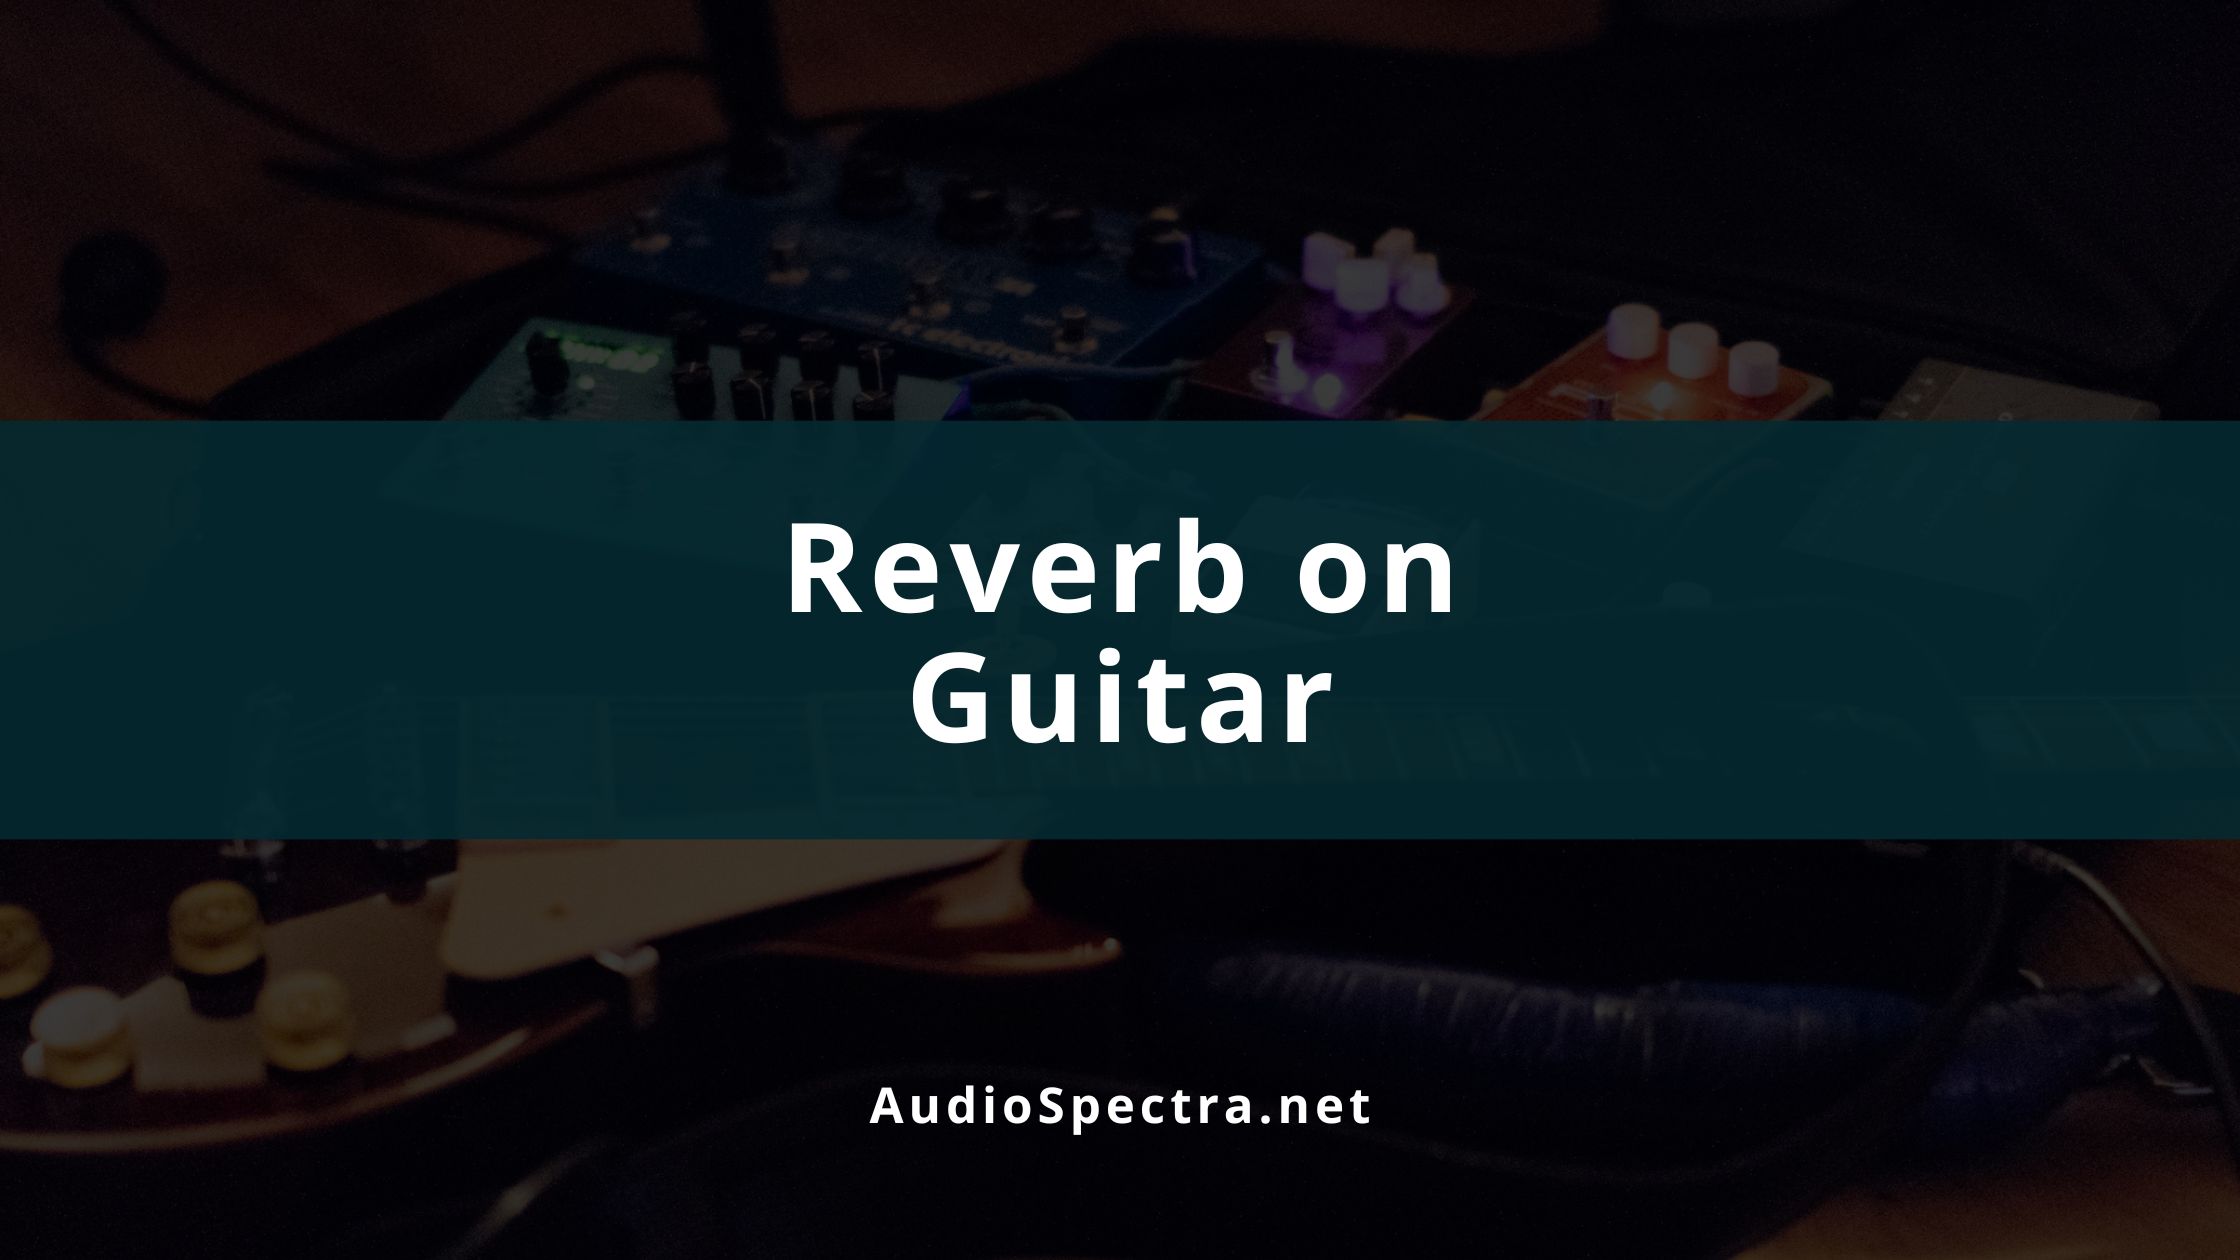 How to Use Reverb on Guitar